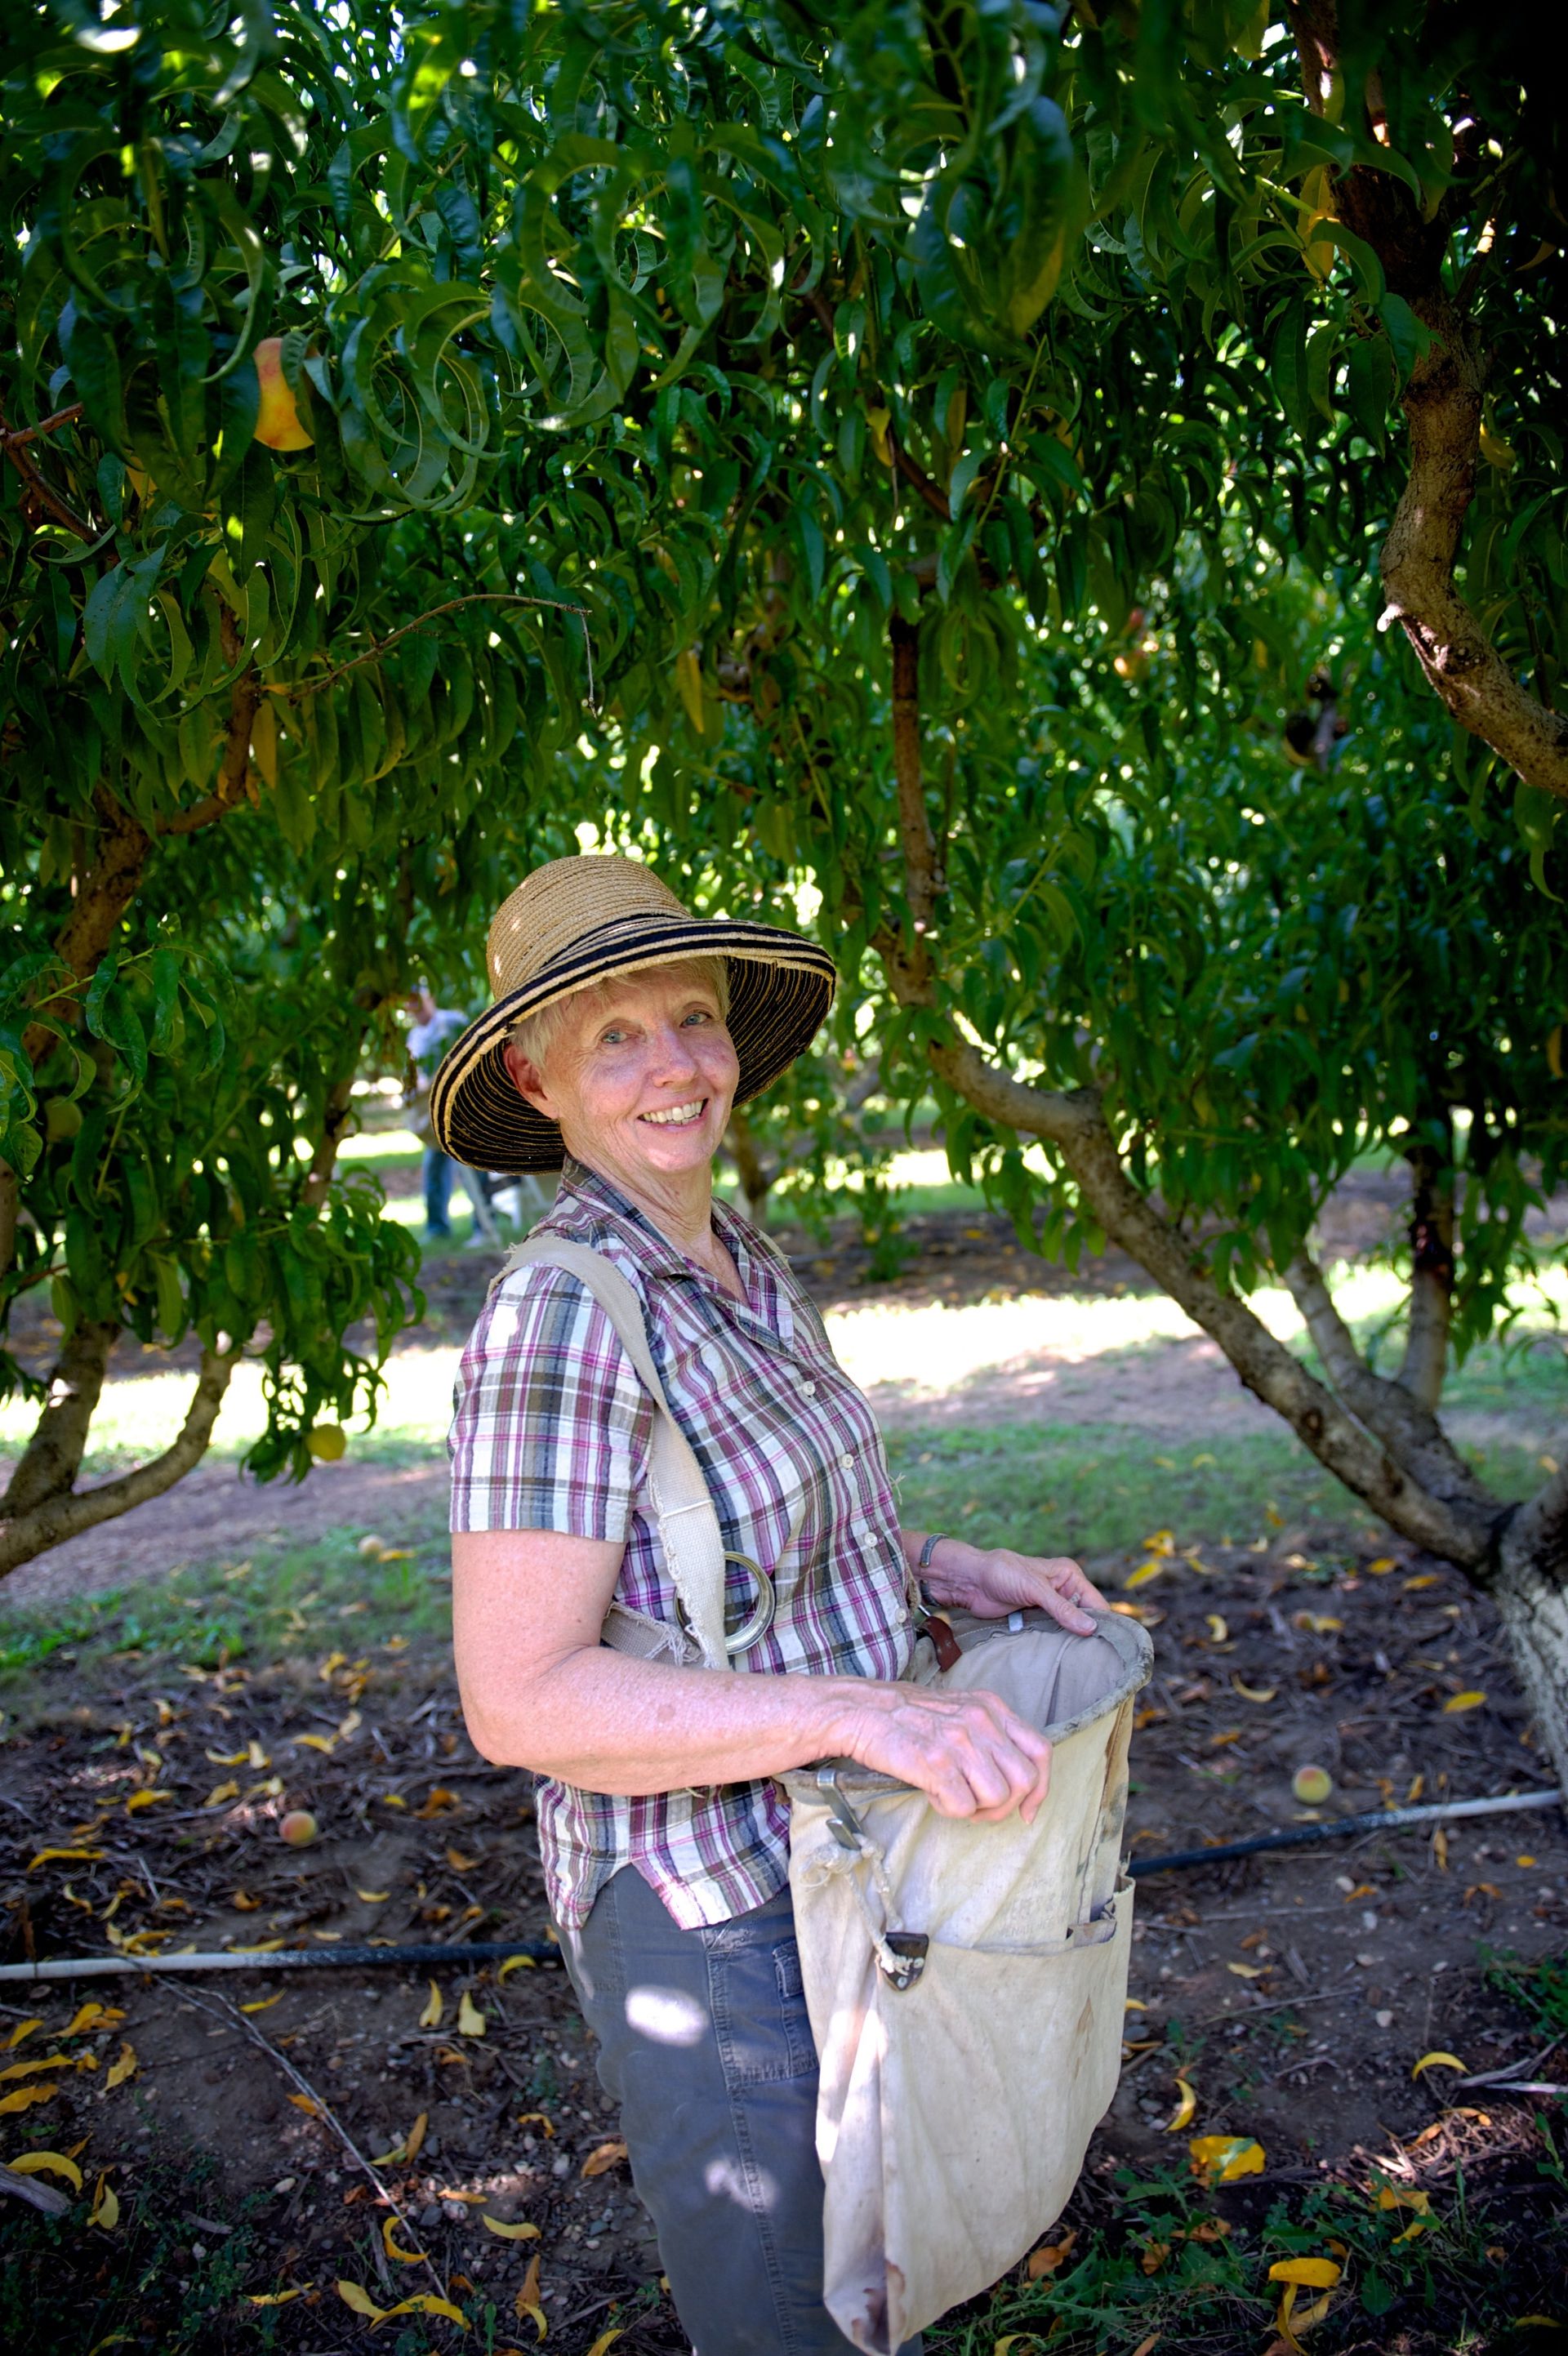 A woman picks peaches and fills a bag with them.